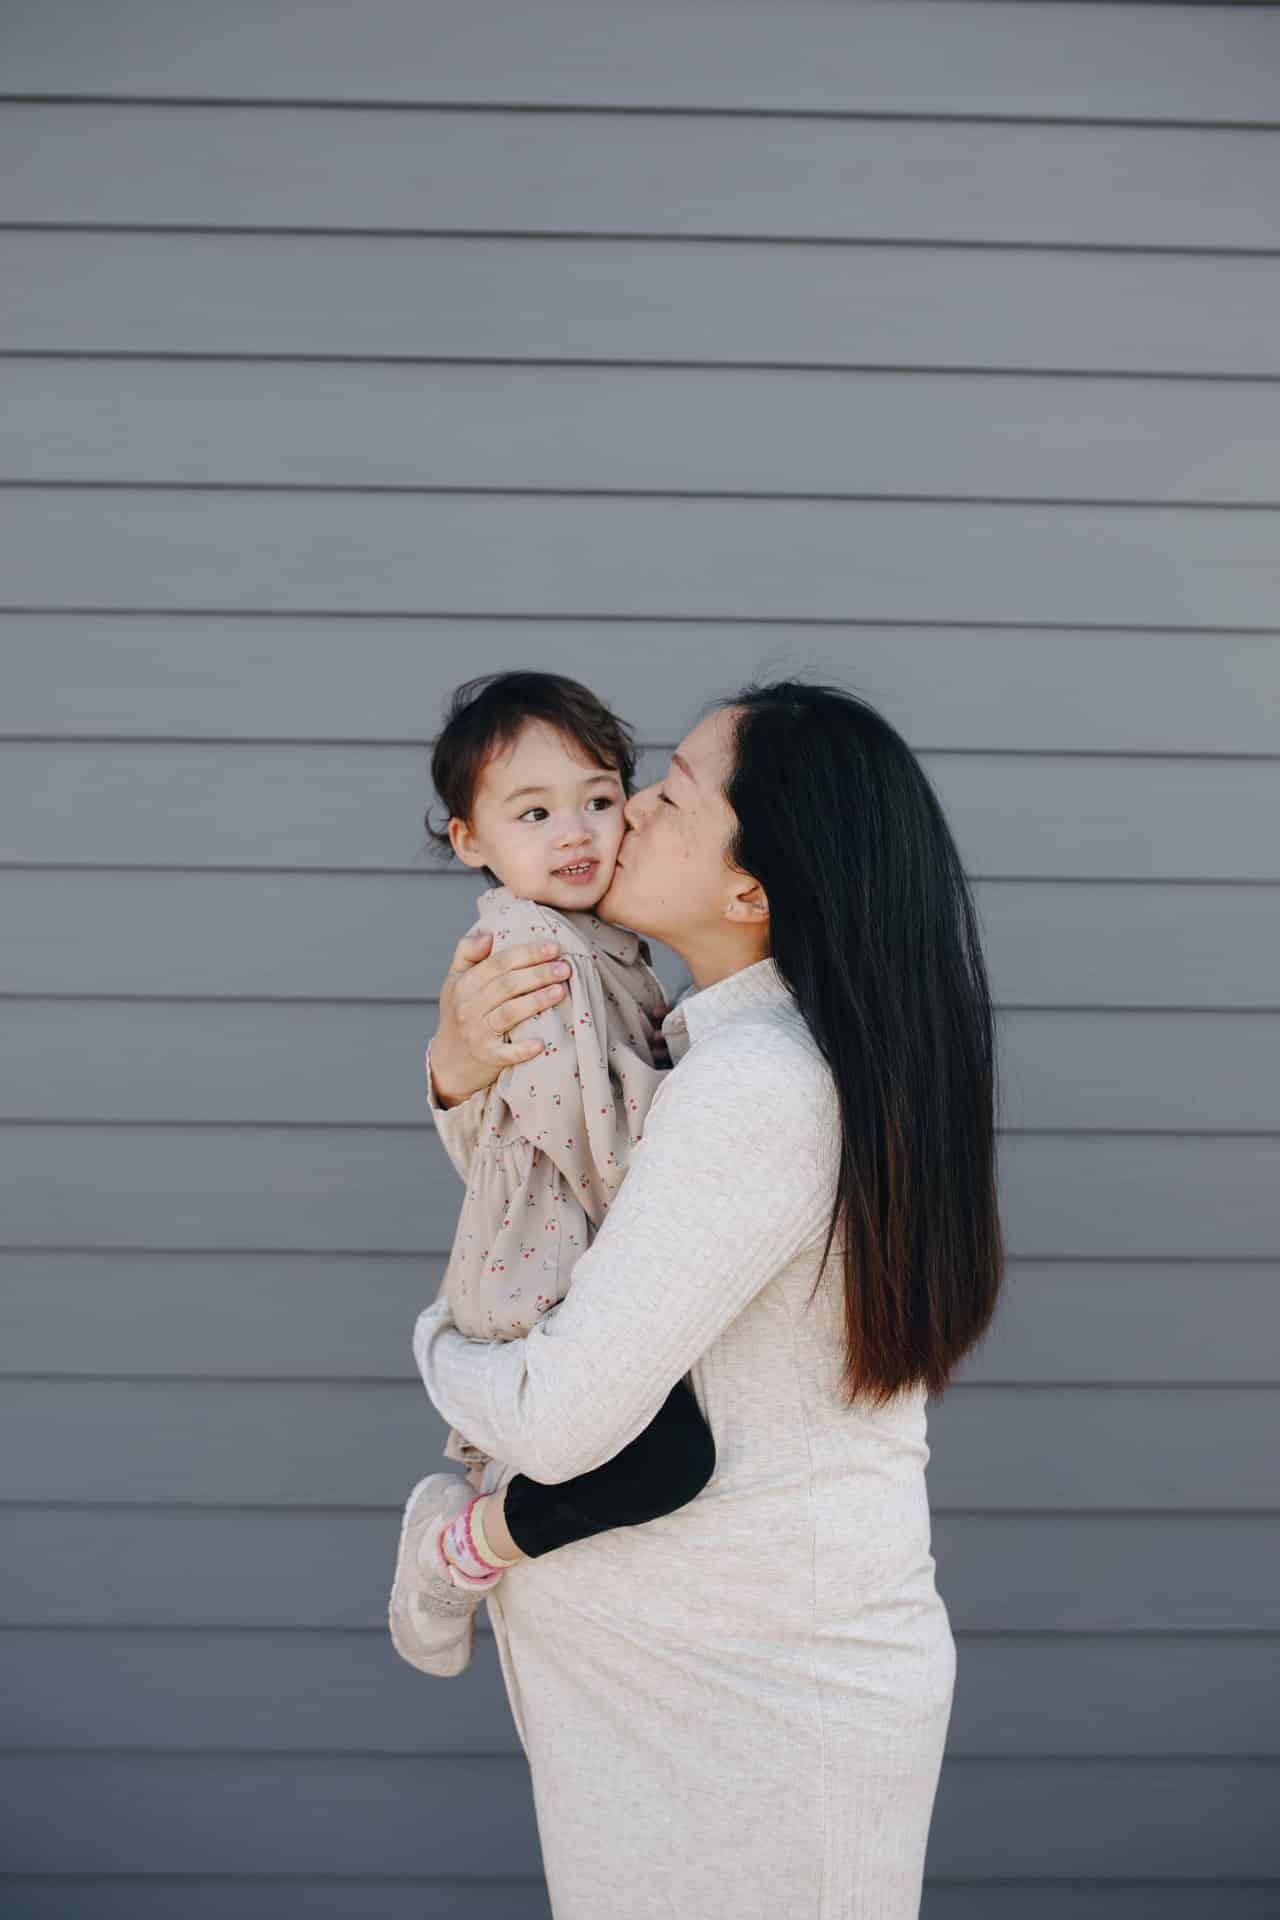 Pregnant Asian American mom holding and kissing a baby outdoors in front of a gray wall.